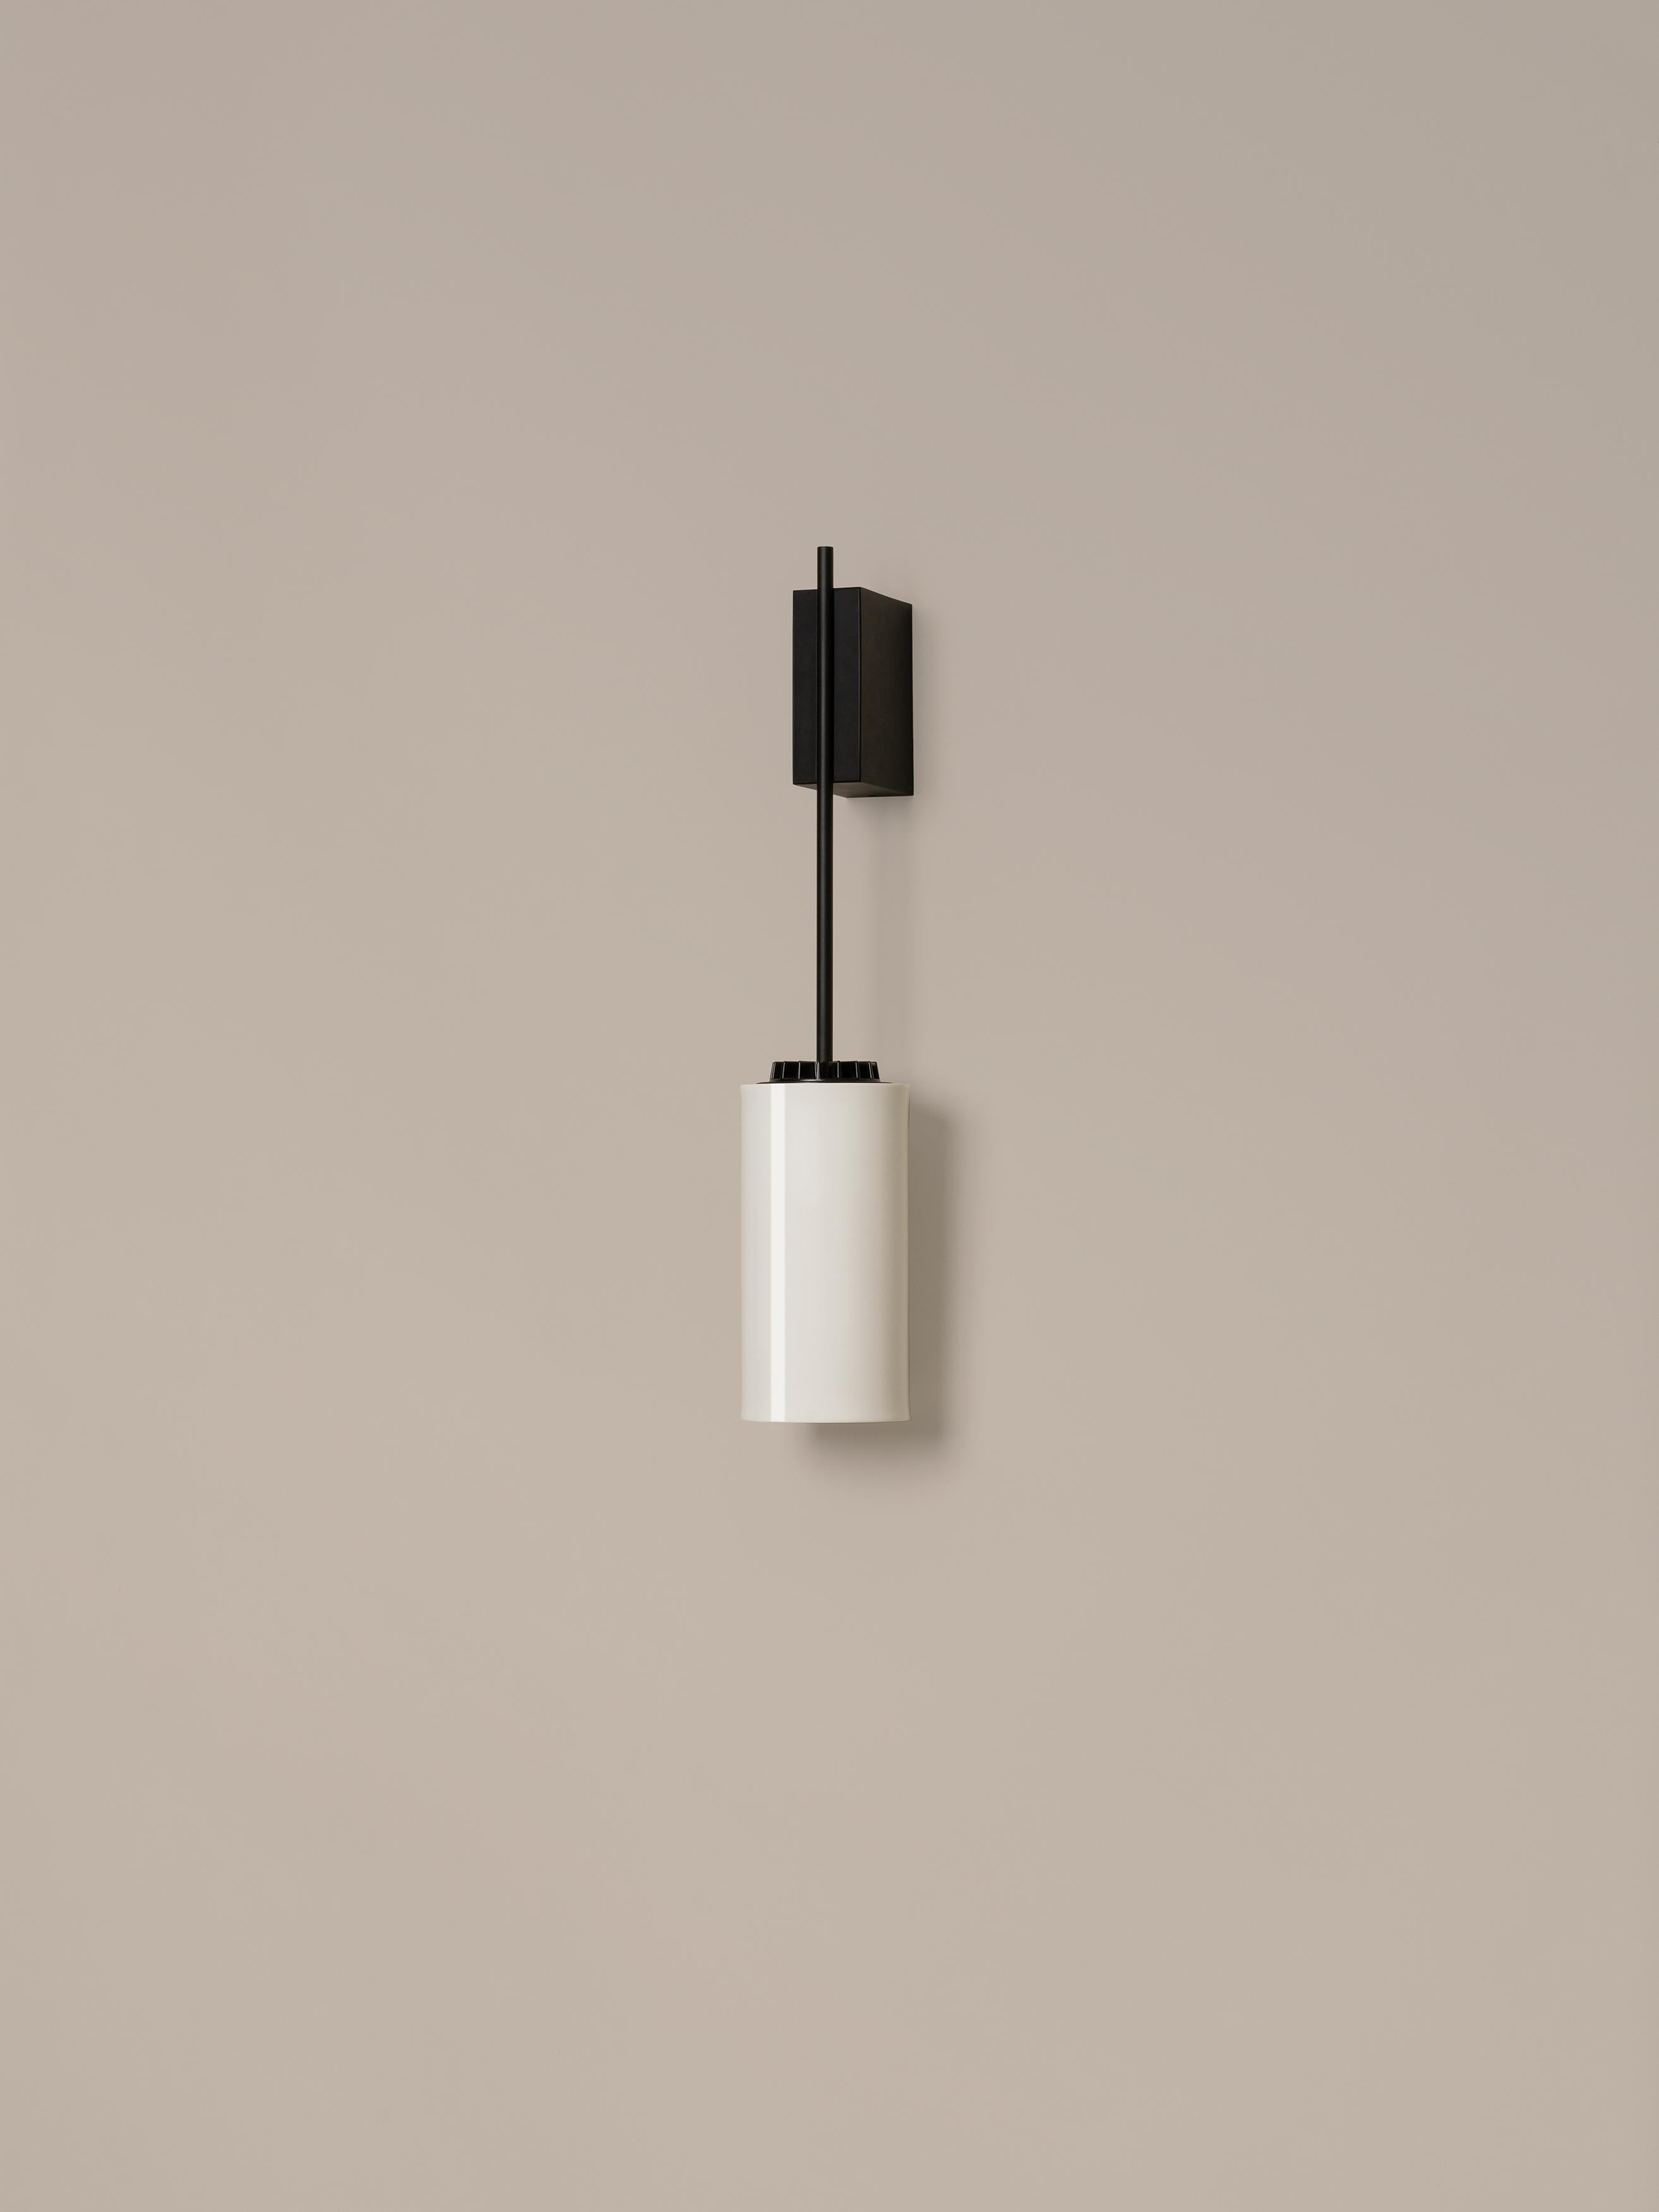 Porcelain Cirio wall lamp by Antoni Arola
Dimensions: D 10 x W 14 x H 54 cm
Materials: Metal, porcelain.

The wall version of Cirio allows the light to be placed at a closer scale to the user. This creates a succession of rhythms that, in